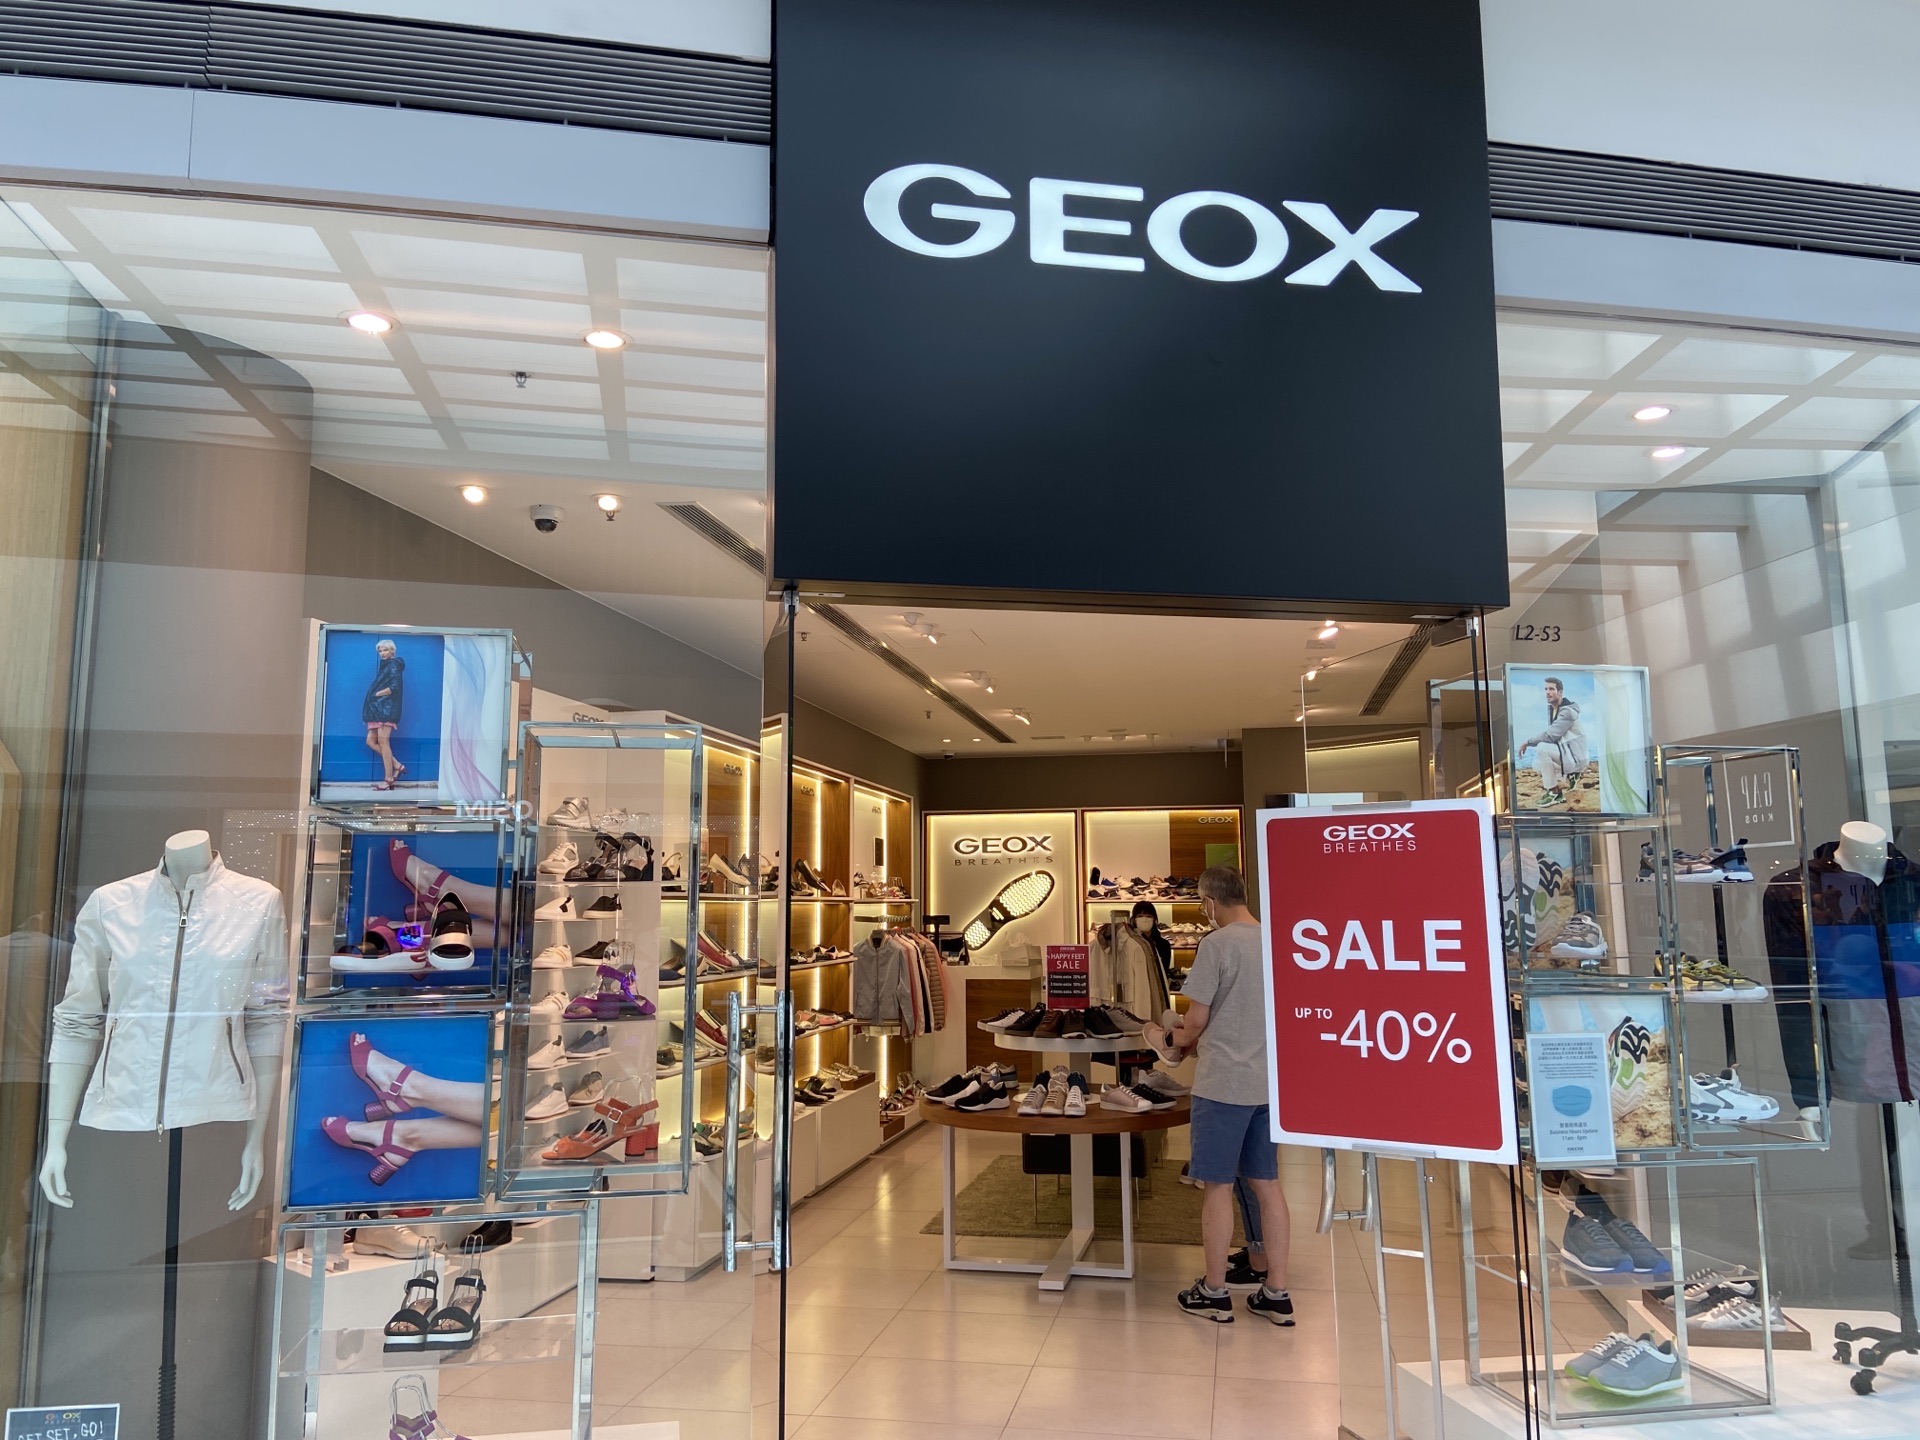 insulator adgang pessimist Shopping itineraries in GEOX(太古城中心一店) in 2023-06-16T17:00:00-07:00 (updated  in 2023-06-16T17:00:00-07:00) - Trip.com